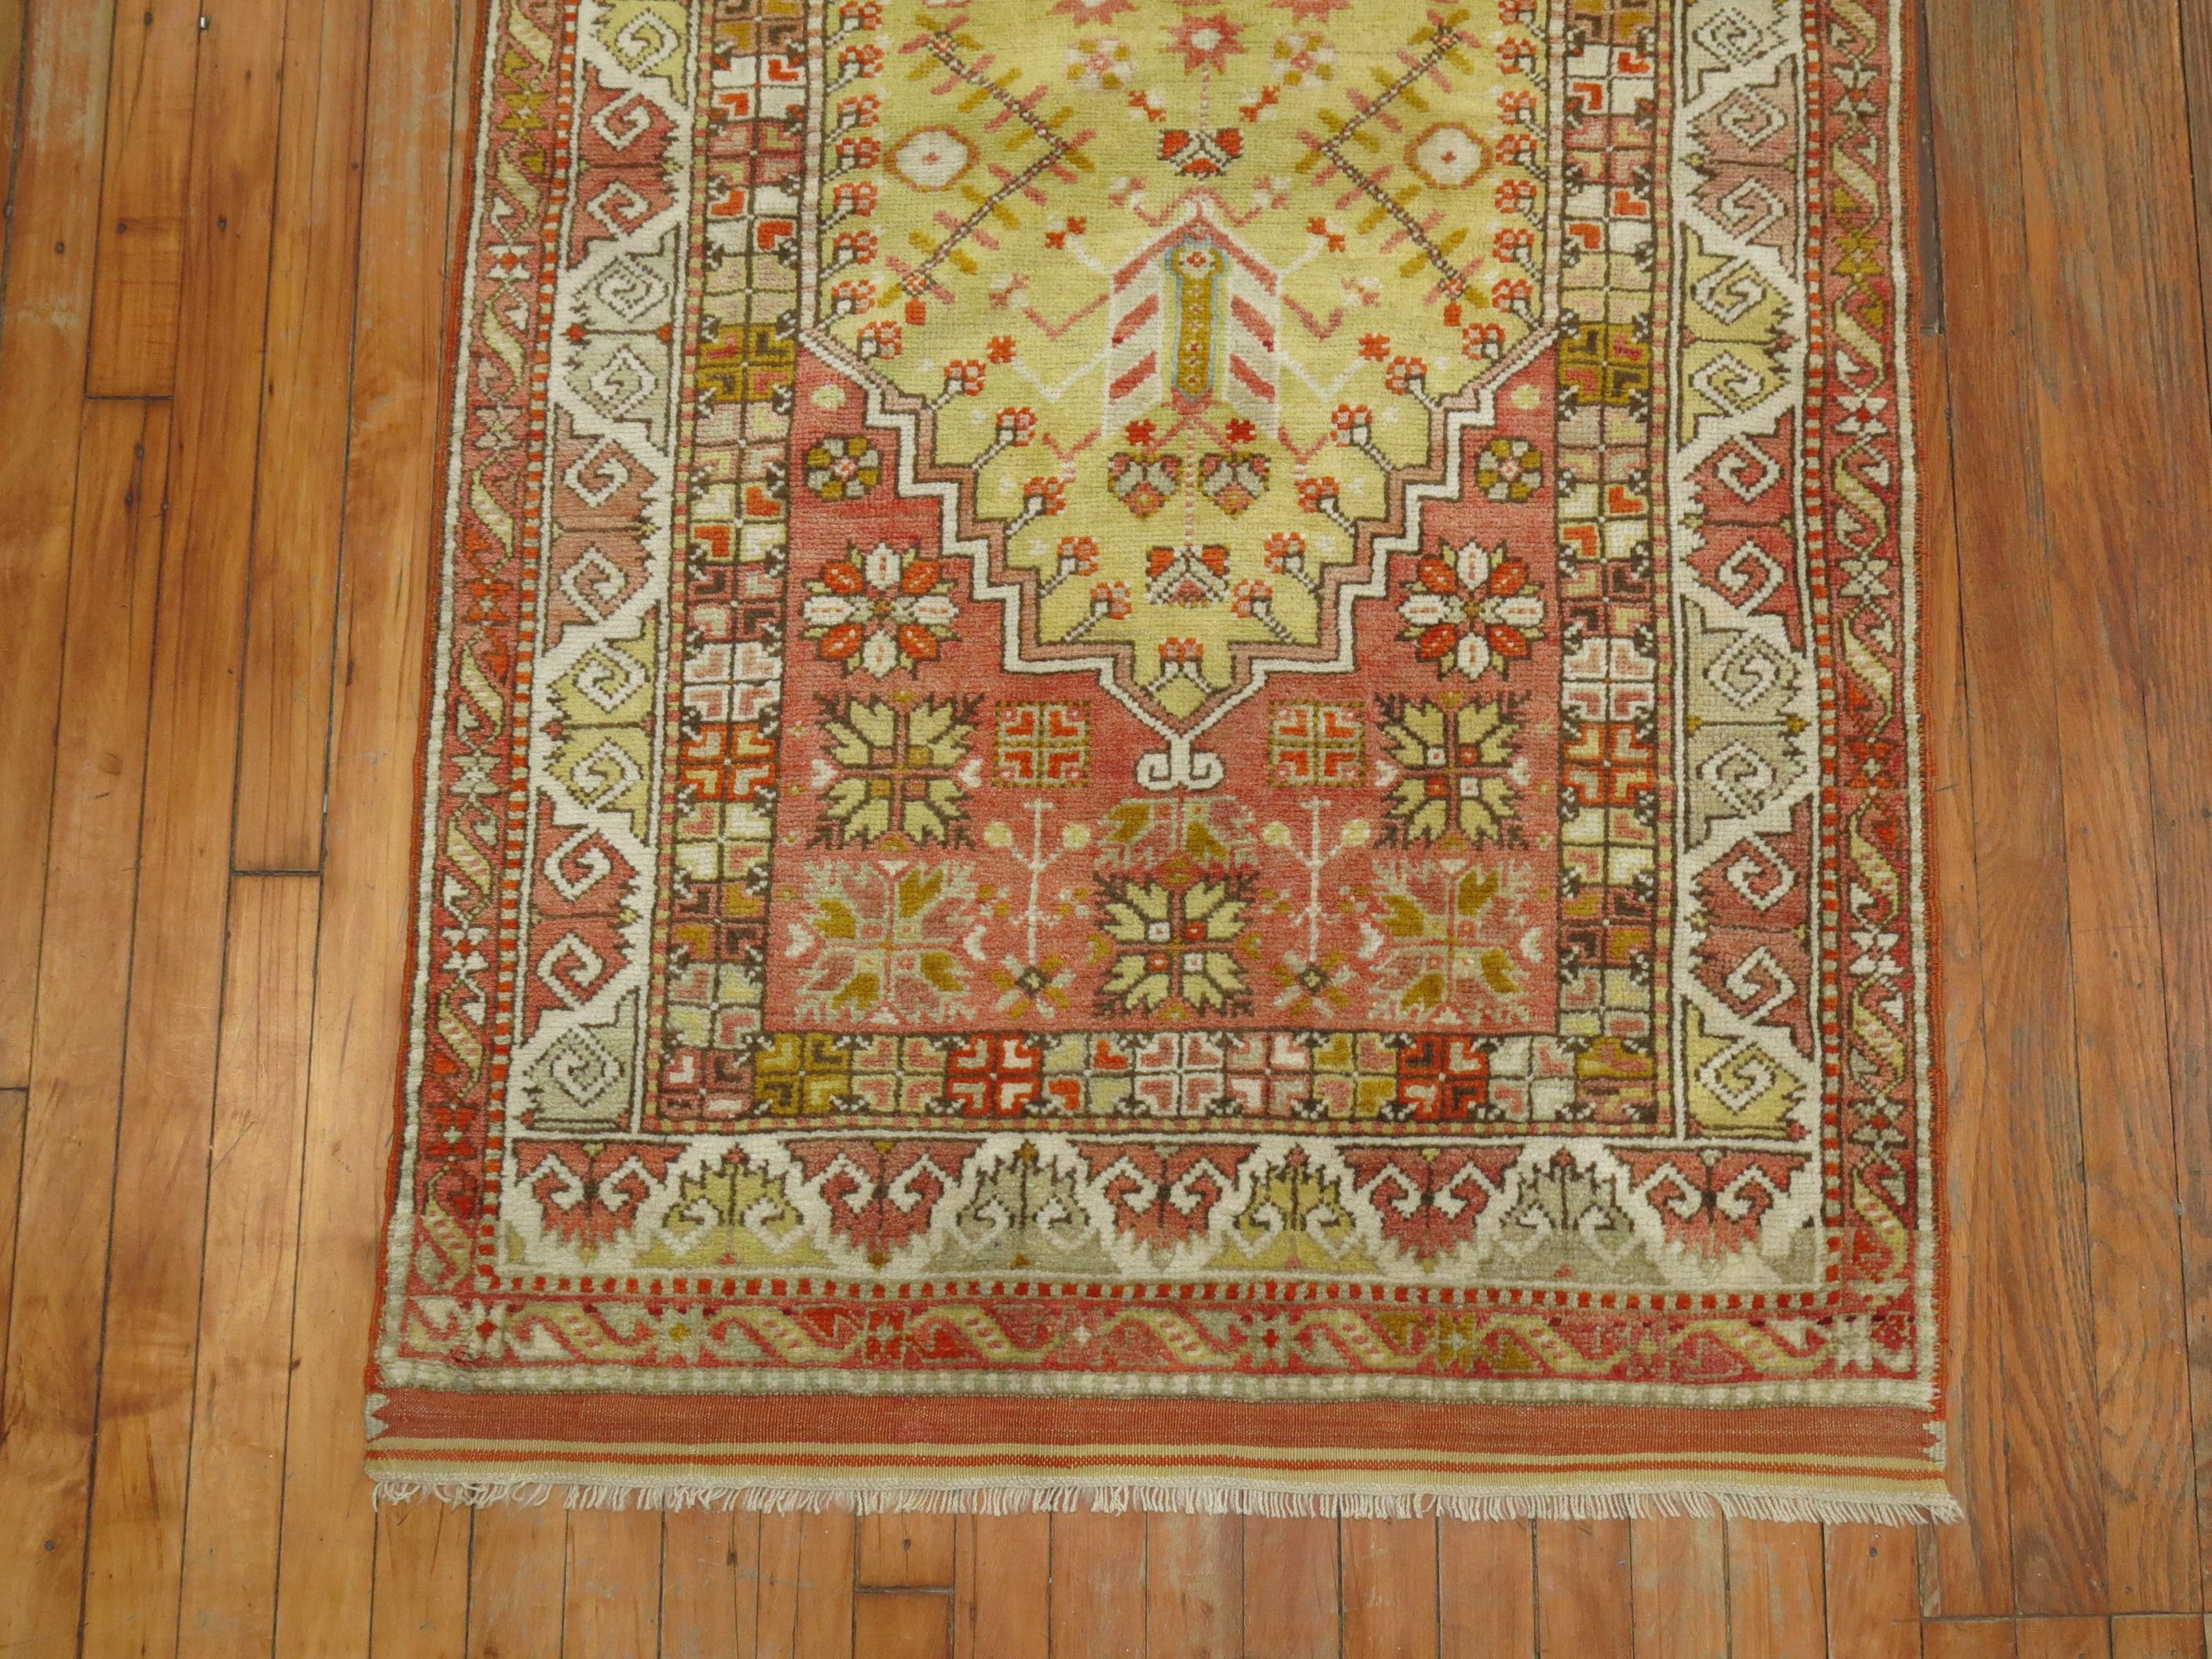 A handmade Turkish Rug with a prayer niche design in predominant colors in light greensand coral, circa 1920

Measures: 3'2